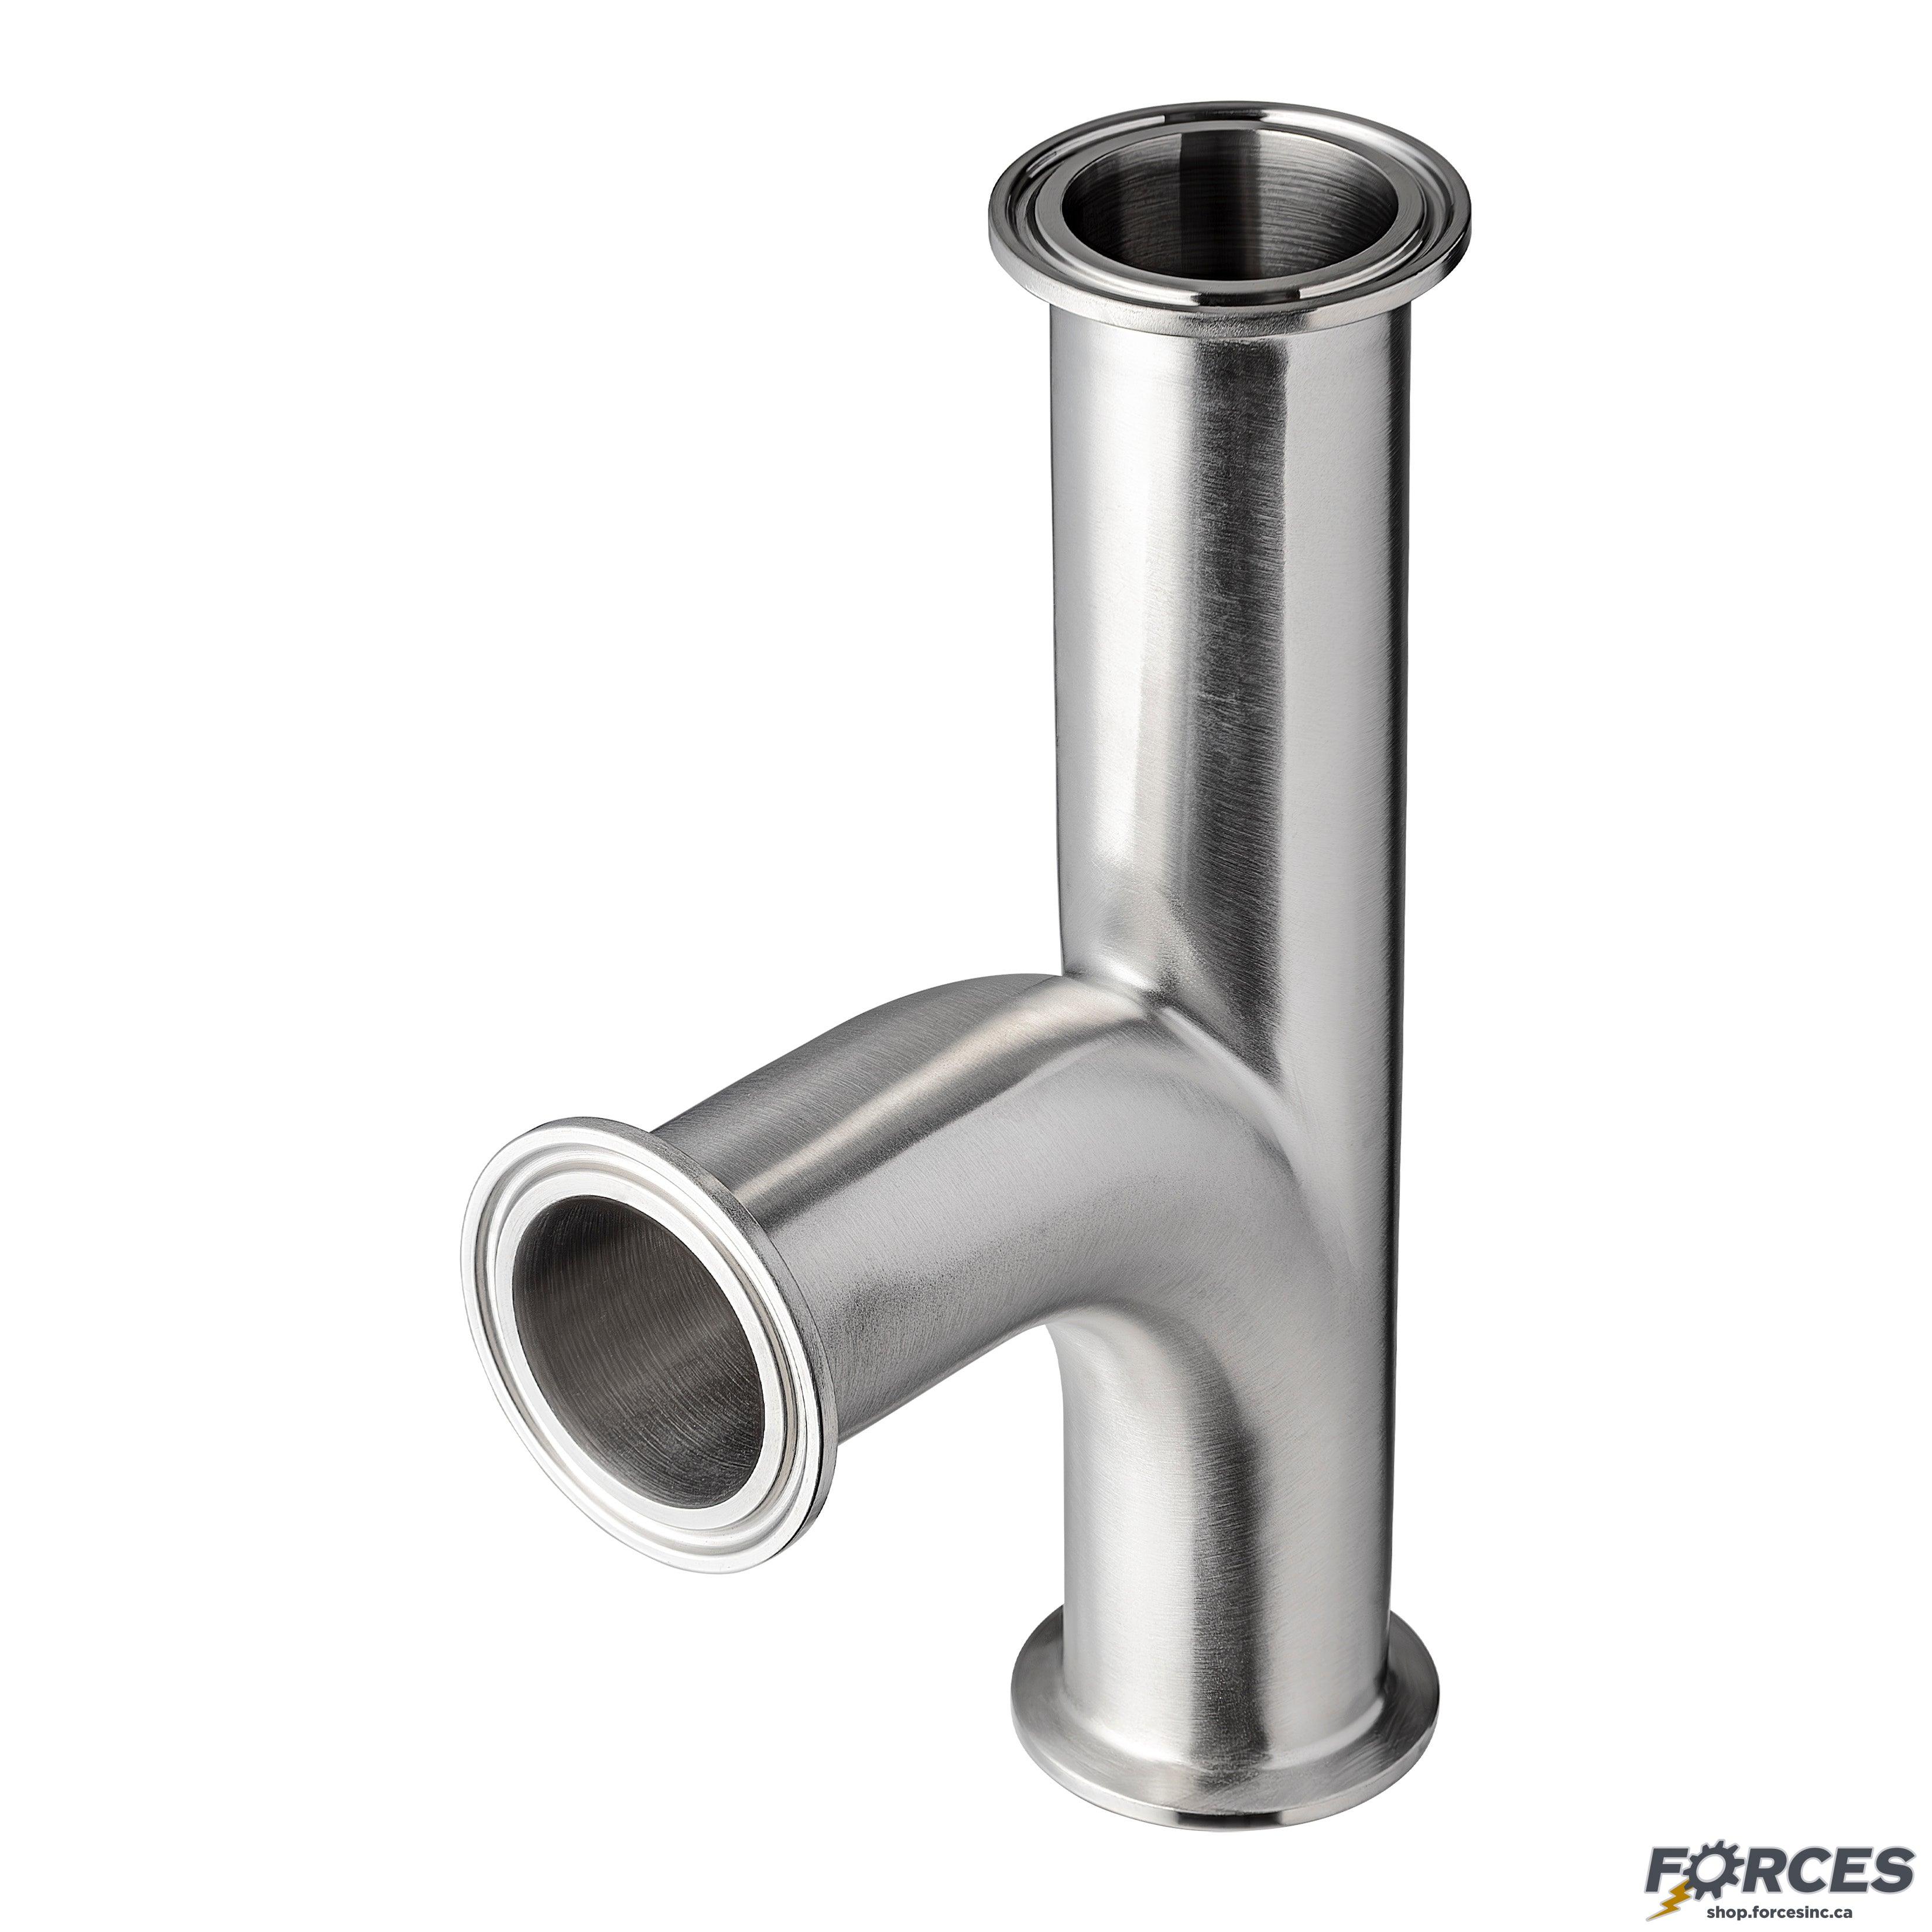 3" Tri-Clamp Curve tee - Stainless Steel 316 - Forces Inc